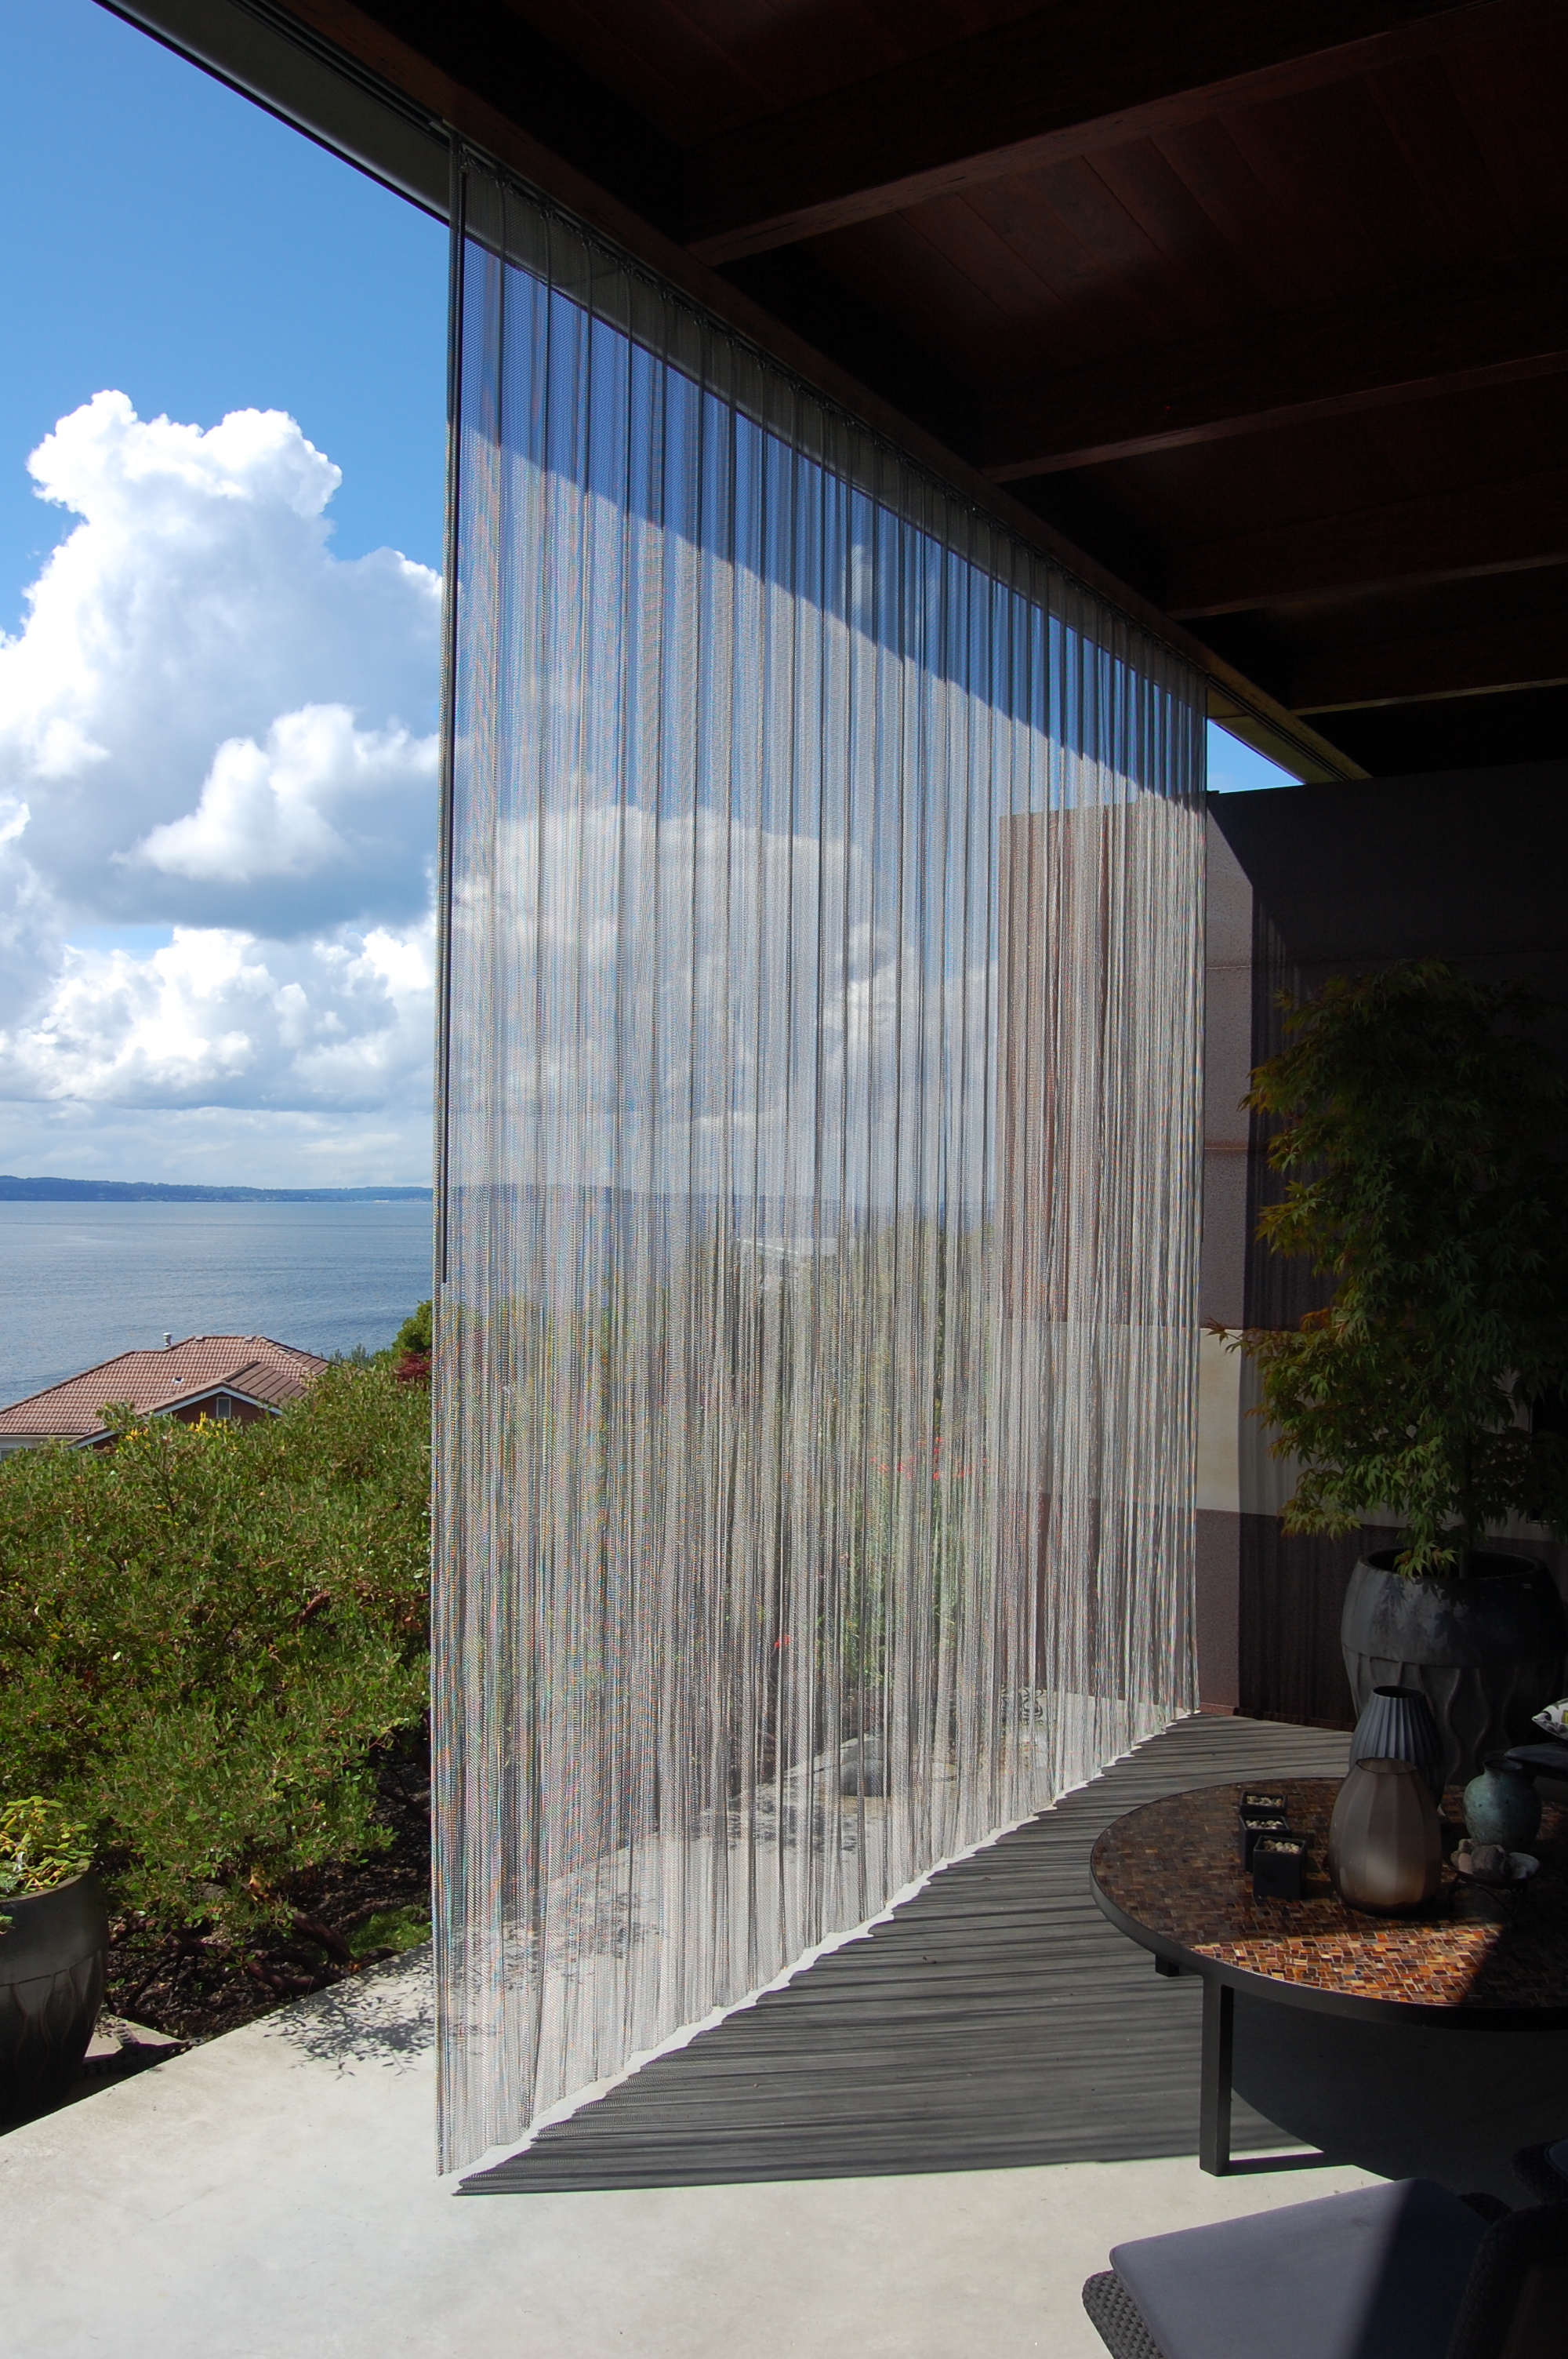  Woven stainless steel screen on a track.  Designed by Eggleston/Farkas Architects 